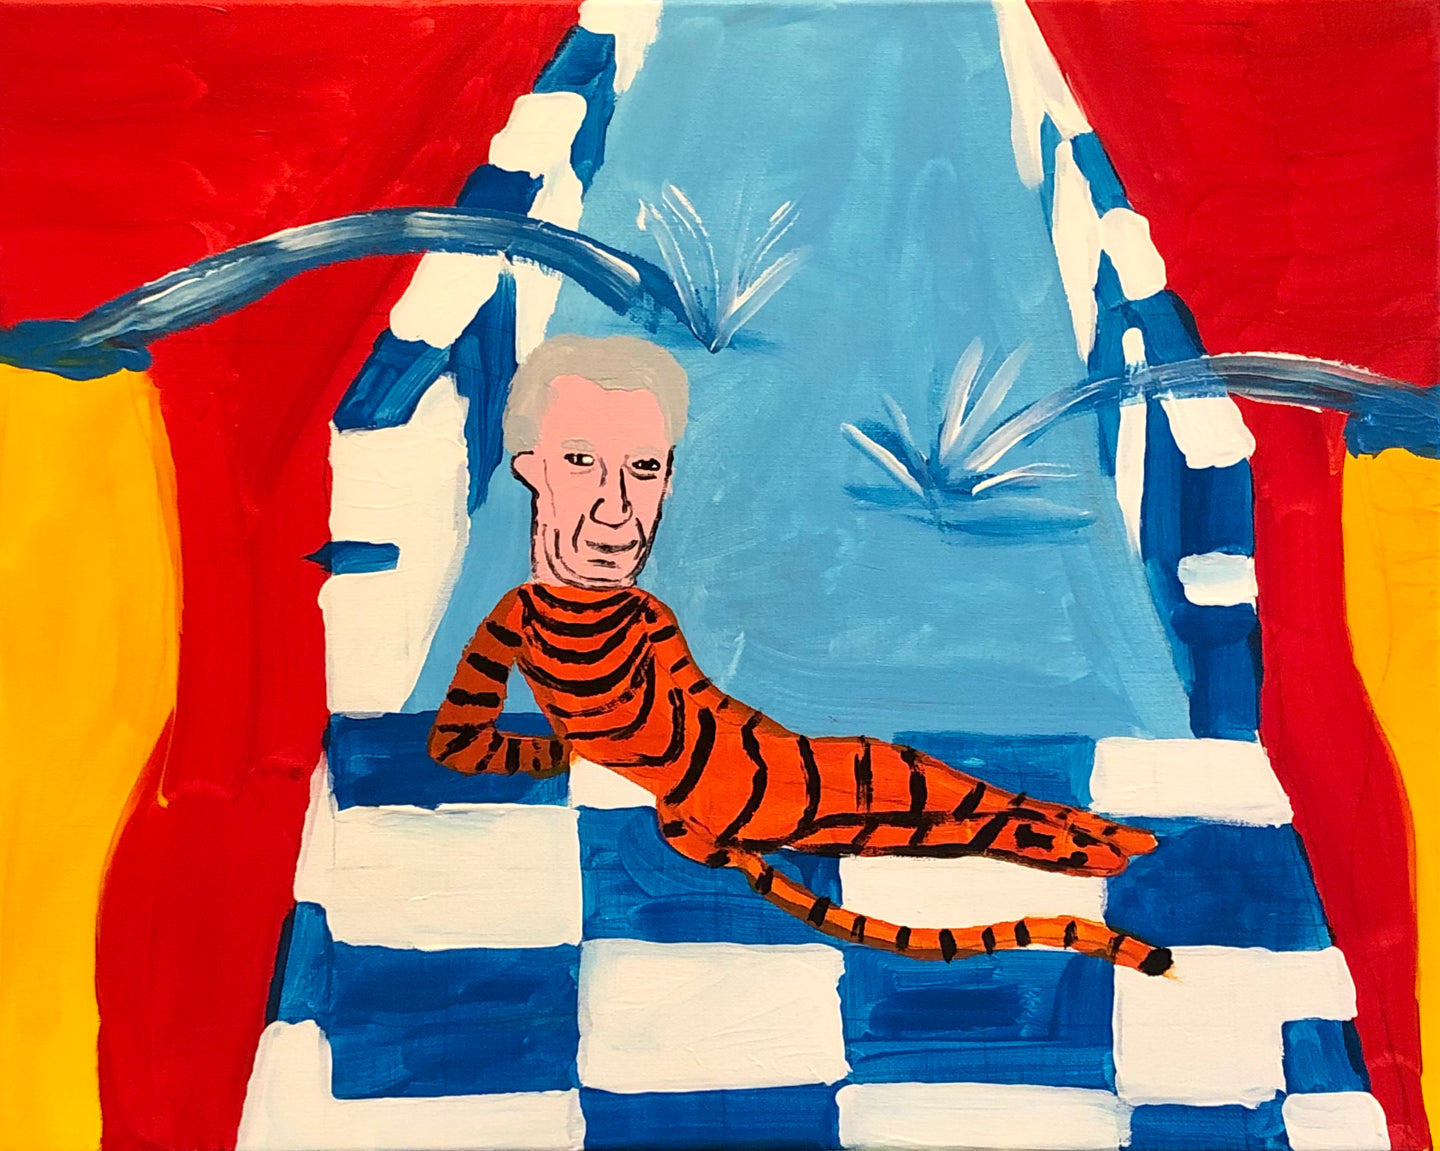 Jeffrey Epstein as Cat Lady by Pool (After 